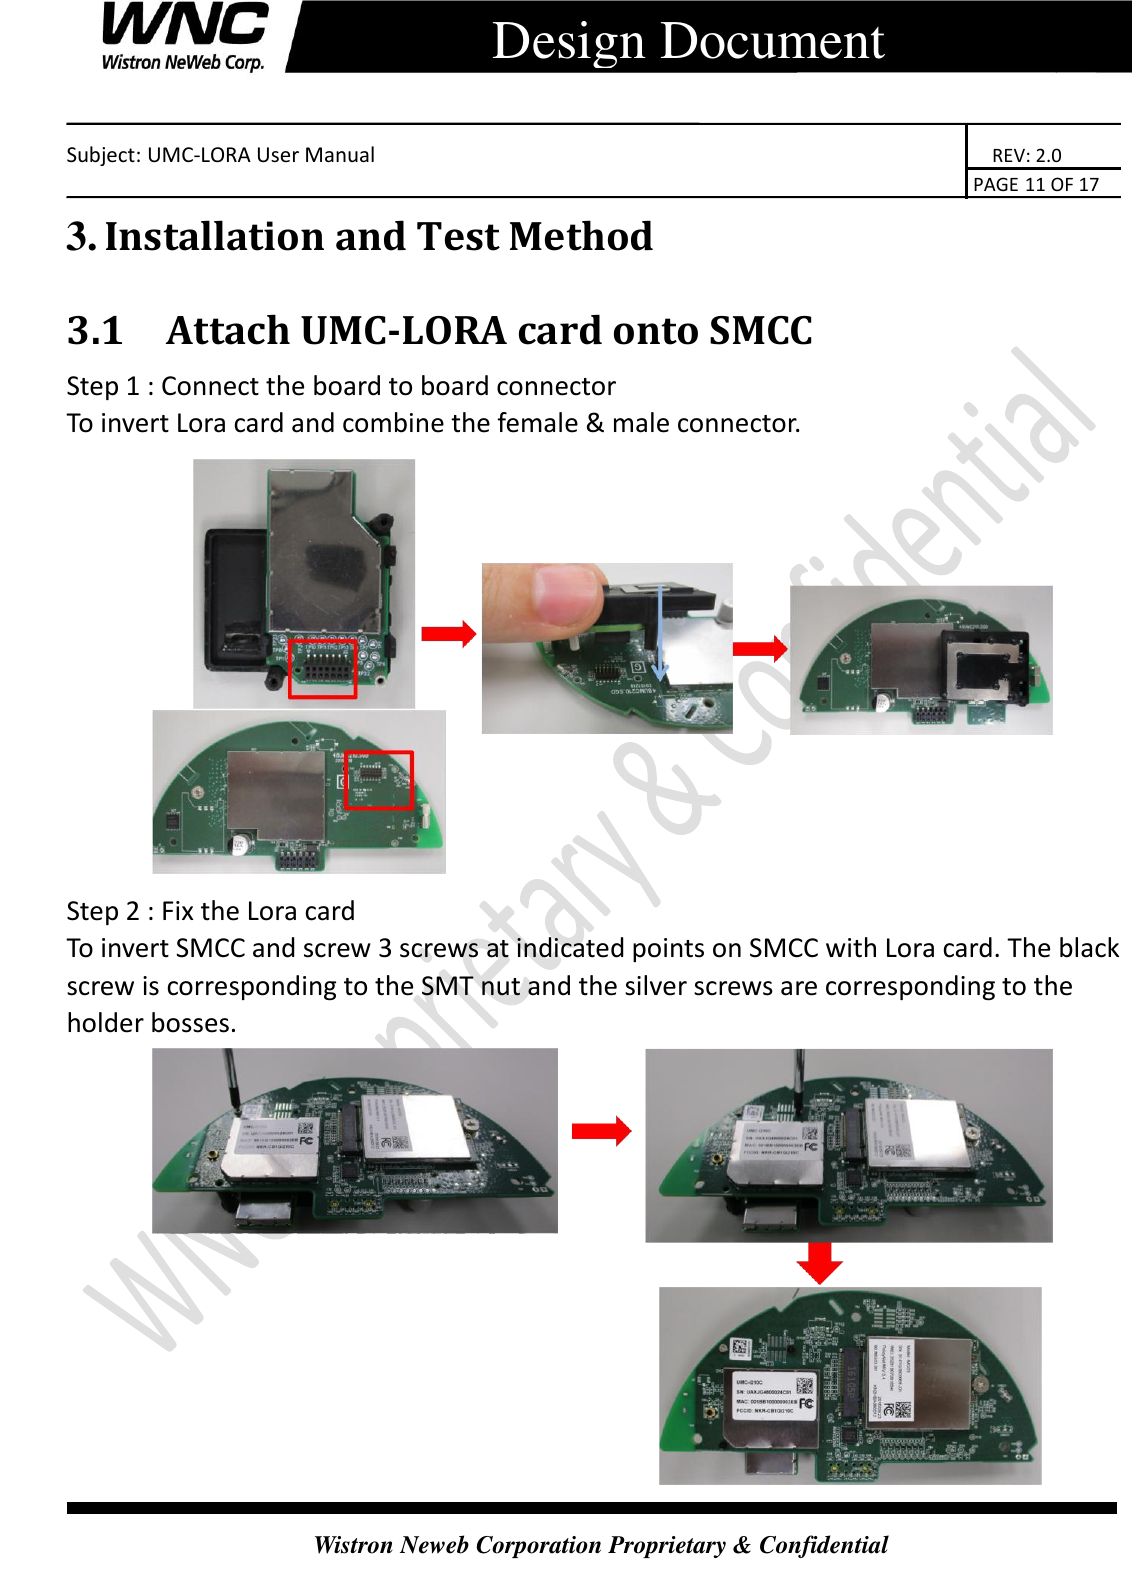    Subject: UMC-LORA User Manual                                                                      REV: 2.0                                                                                        PAGE 11 OF 17  Wistron Neweb Corporation Proprietary &amp; Confidential      Design Document 3. Installation and Test Method 3.1 Attach UMC-LORA card onto SMCC Step 1 : Connect the board to board connector To invert Lora card and combine the female &amp; male connector.  Step 2 : Fix the Lora card To invert SMCC and screw 3 screws at indicated points on SMCC with Lora card. The black screw is corresponding to the SMT nut and the silver screws are corresponding to the holder bosses.  